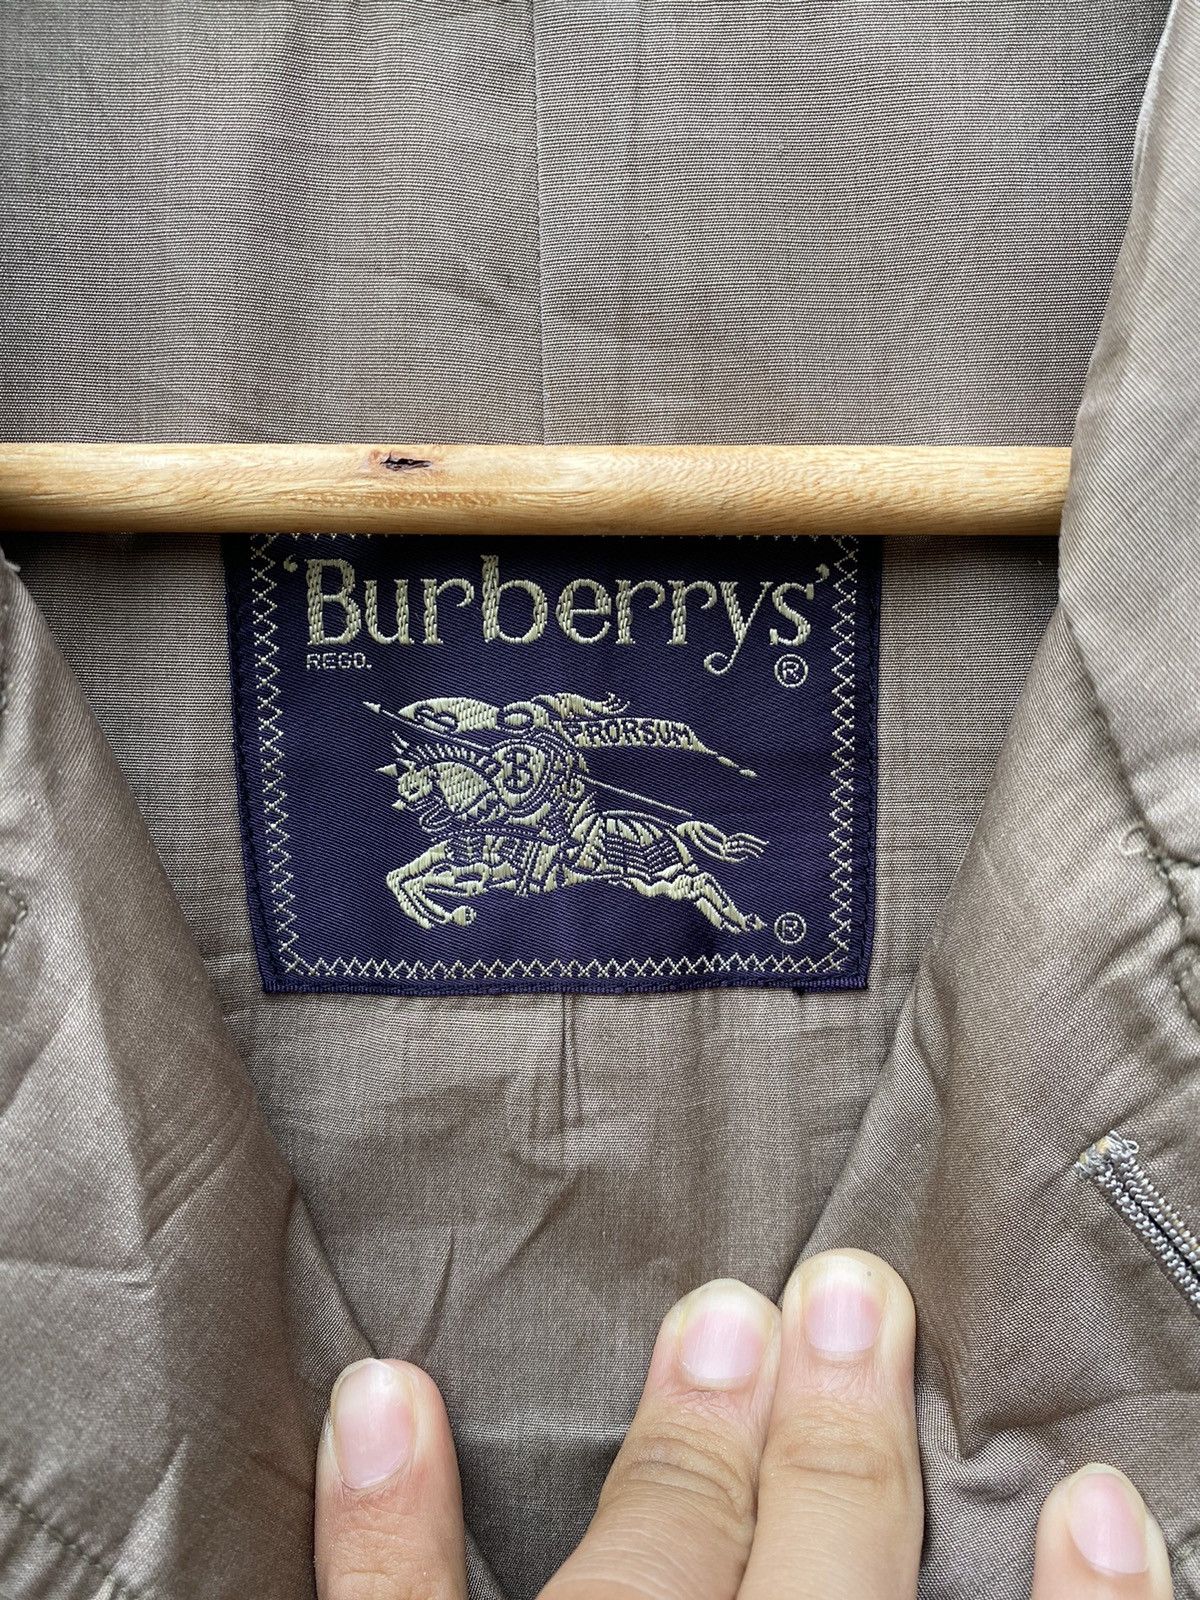 Burberry Trench Coat Single Breasted Jacket - 7